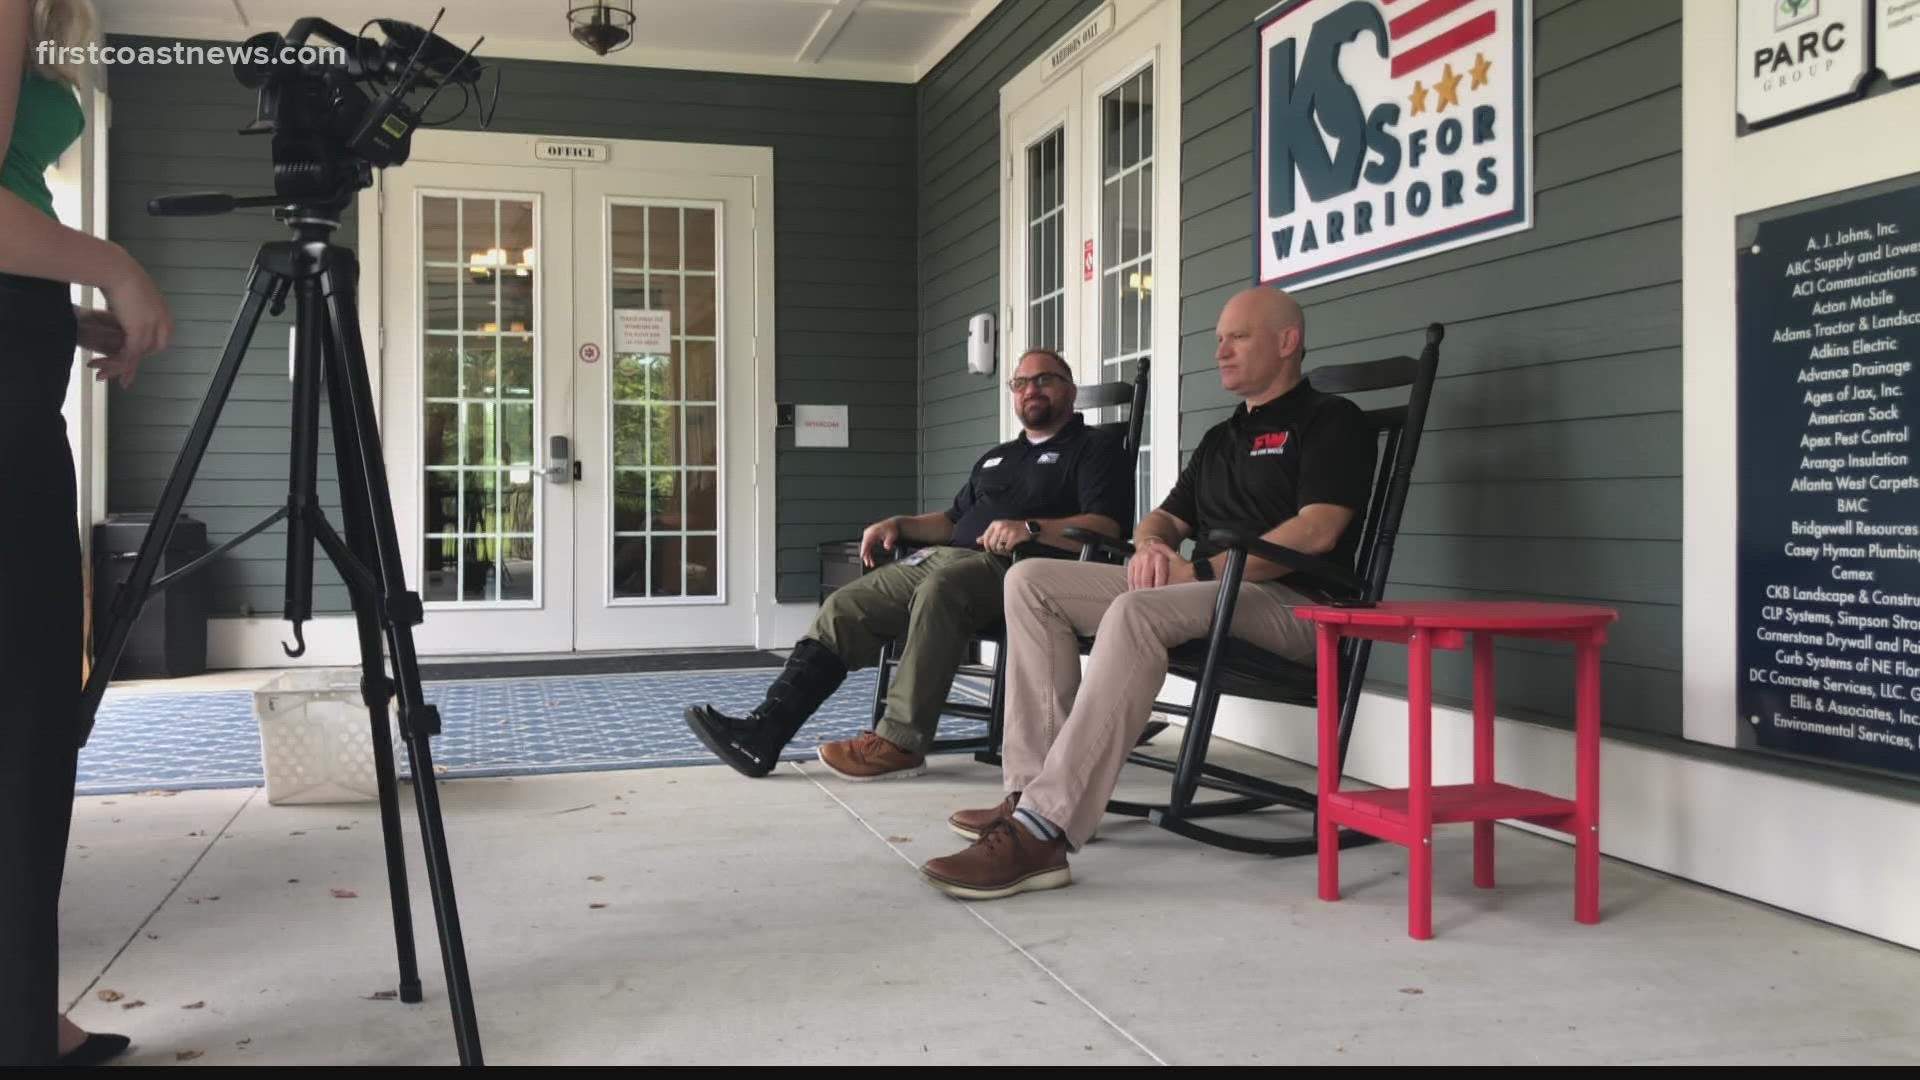 The Fire Watch organization works to prevent veteran suicide on the First Coast. The founder says the anniversary of 9/11 could trigger some vets.